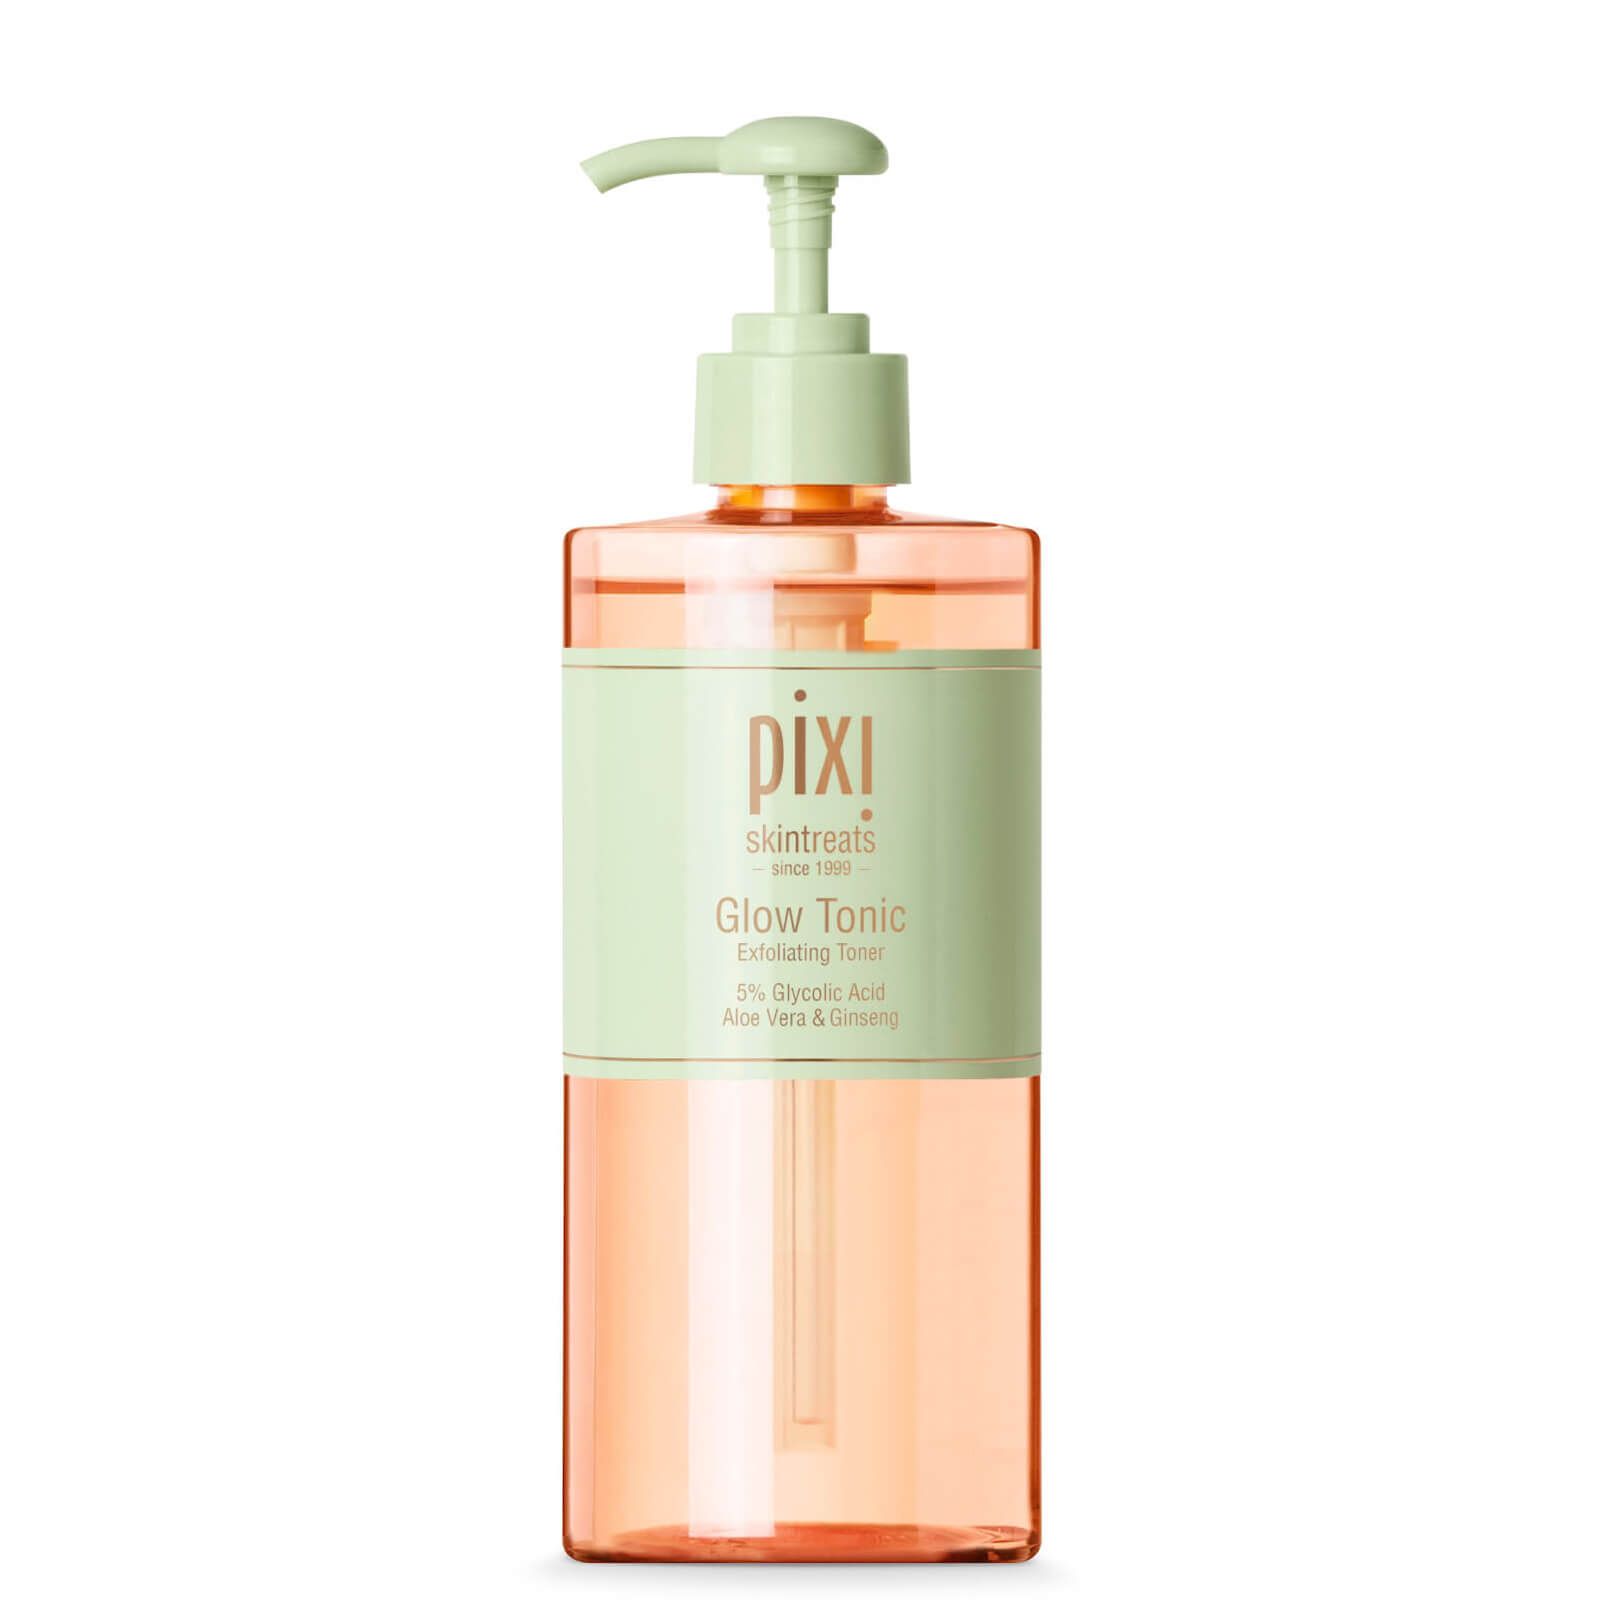 PIXI Glow Tonic Supersize Edition 500ml - Exclusive (Worth £50.00) | Cult Beauty (Global)